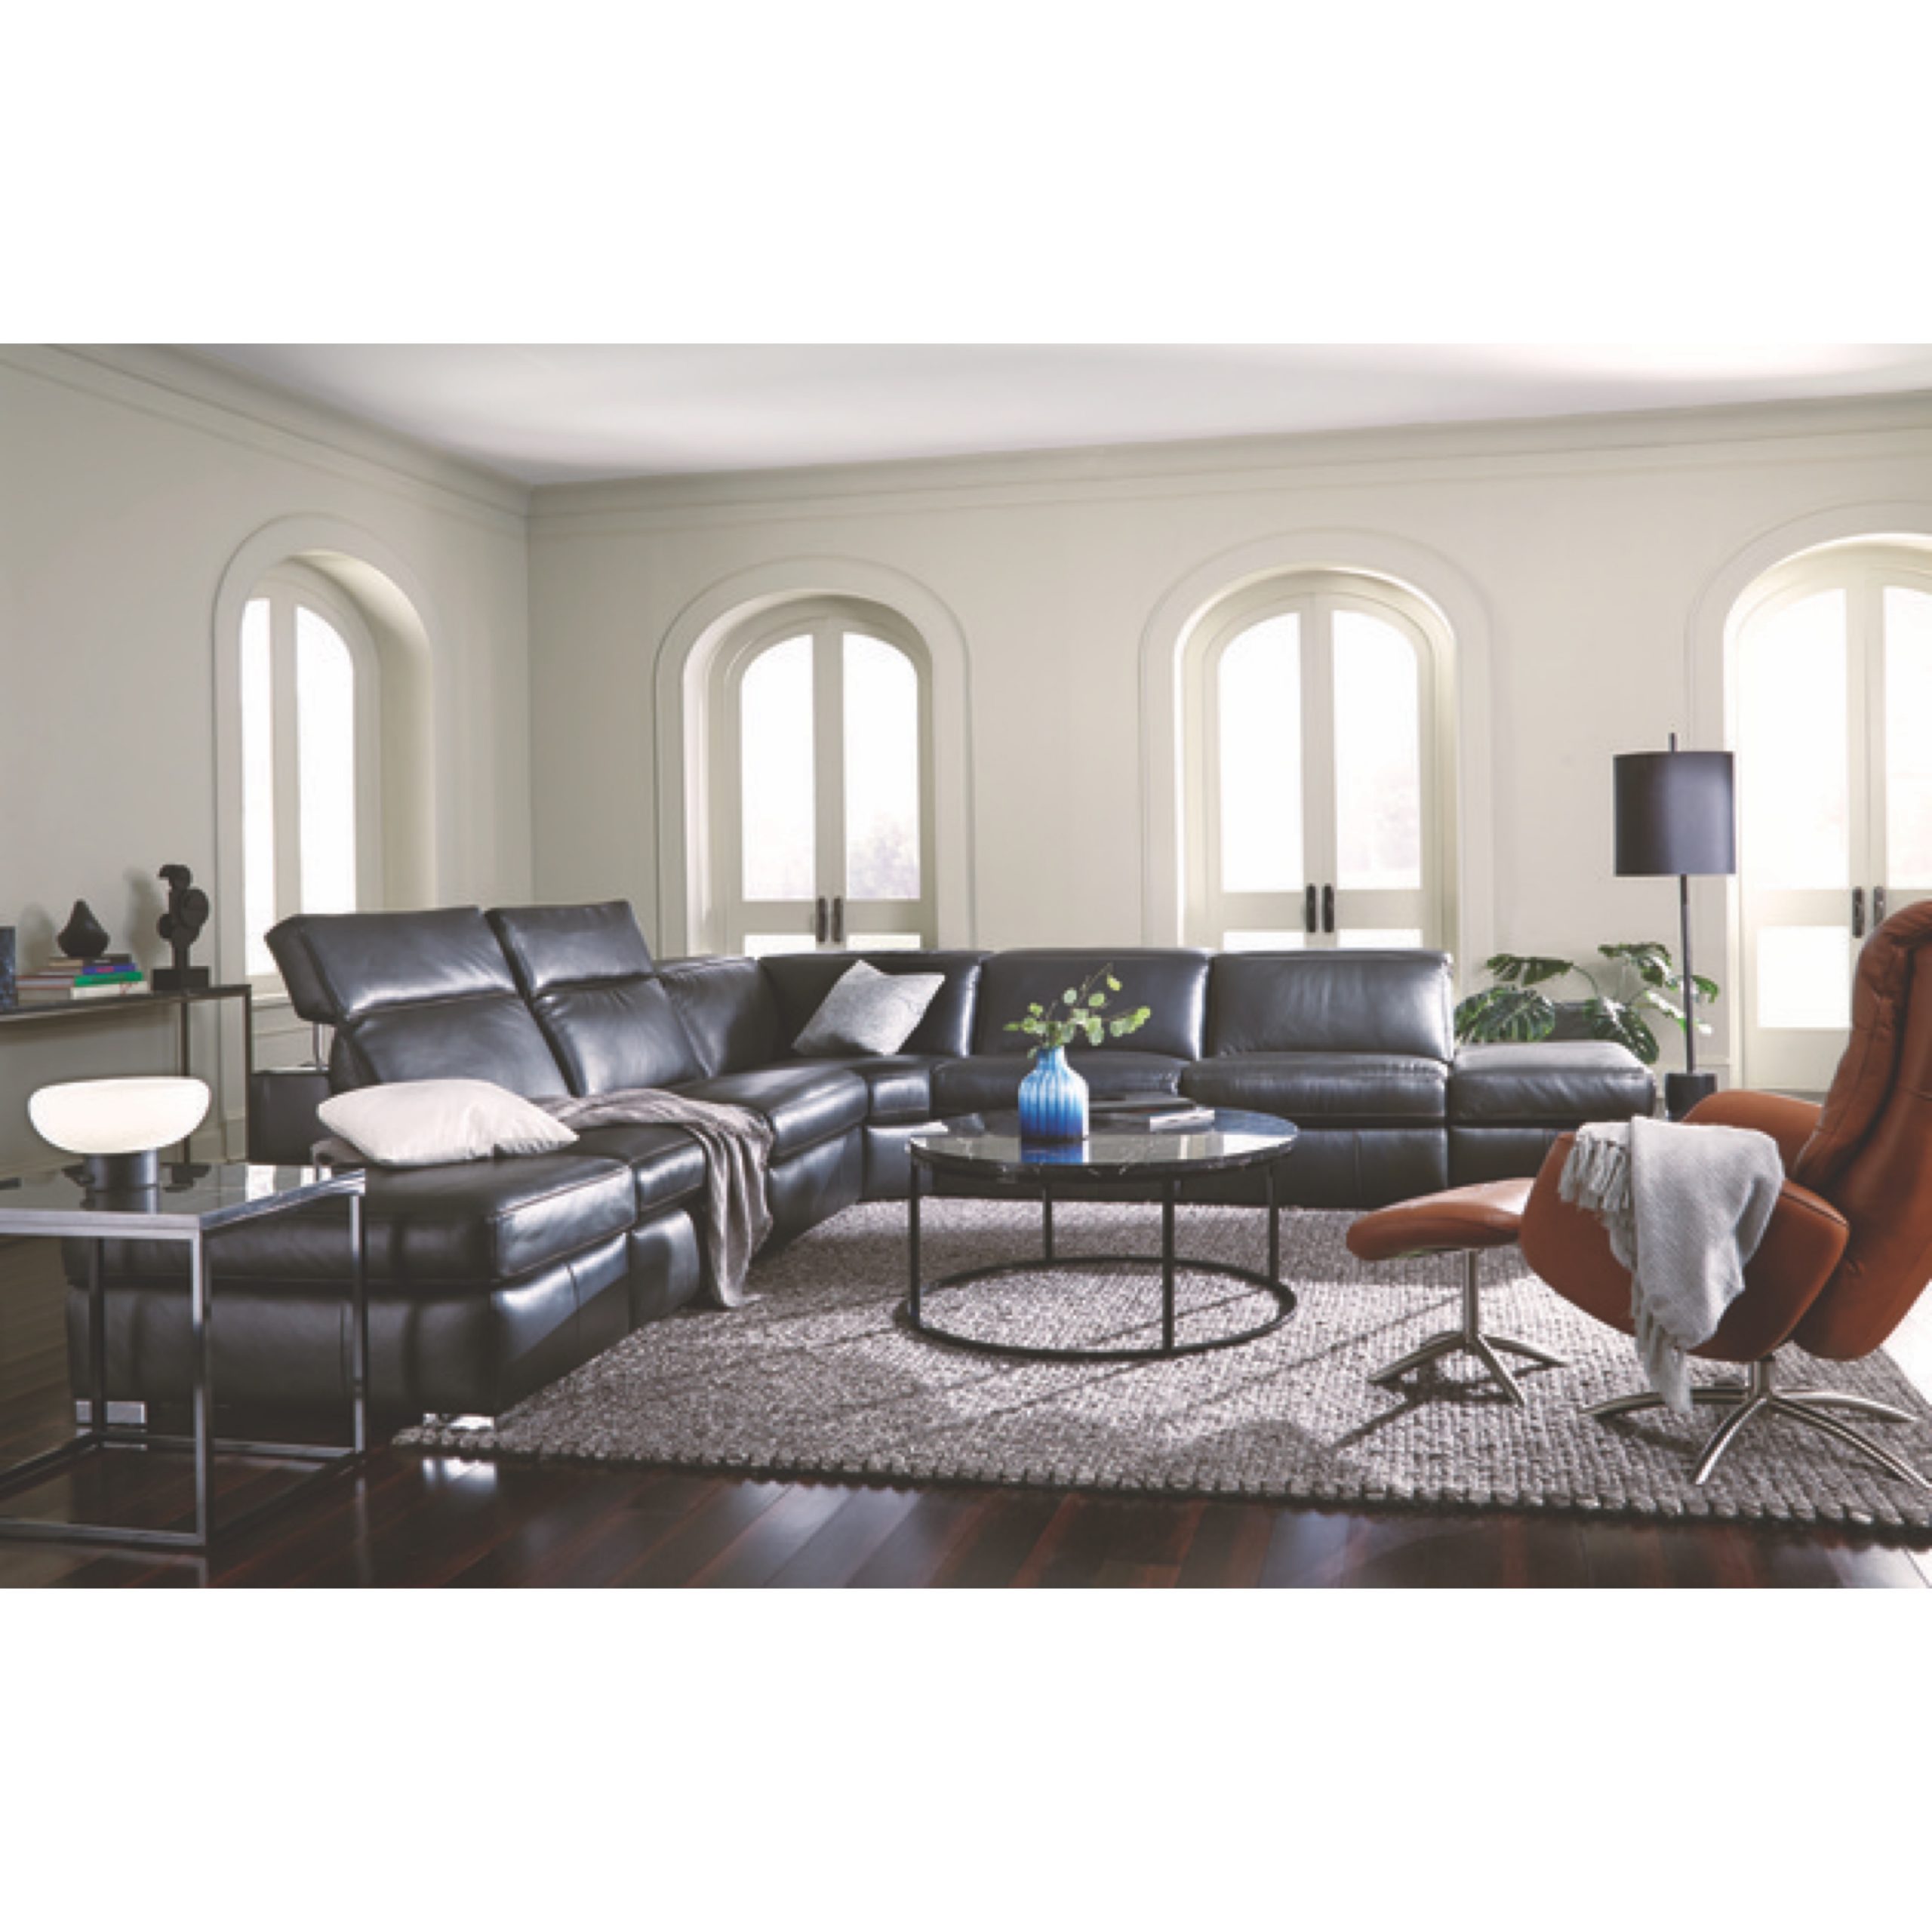 Titan sectional in living room setting